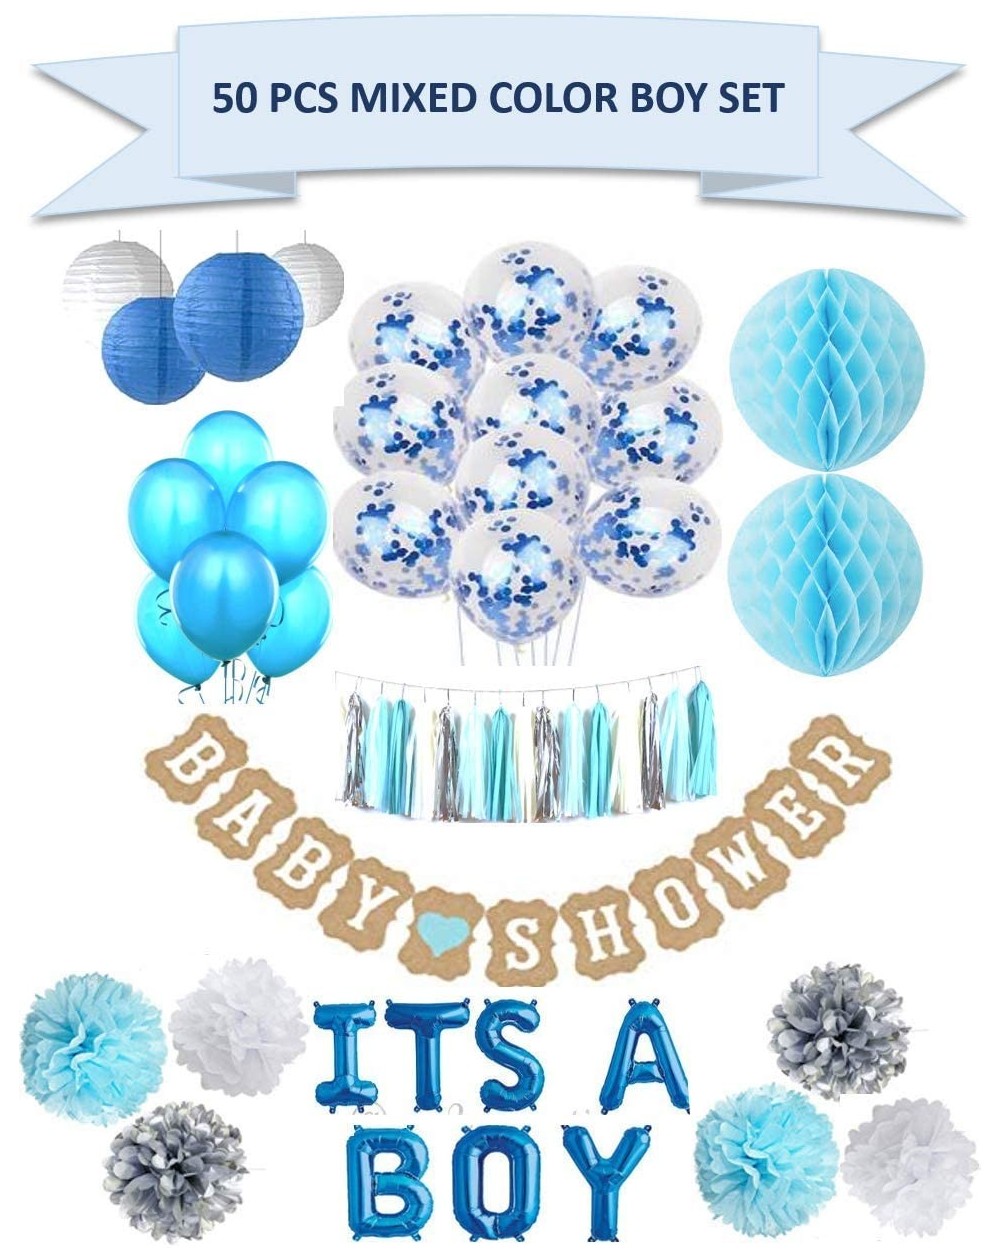 Party Packs Baby Shower Decoration Pack (Blue/White/Silver) - Party Supplies for Gender Reveal (It's a Boy/Girl) - Blue/White...